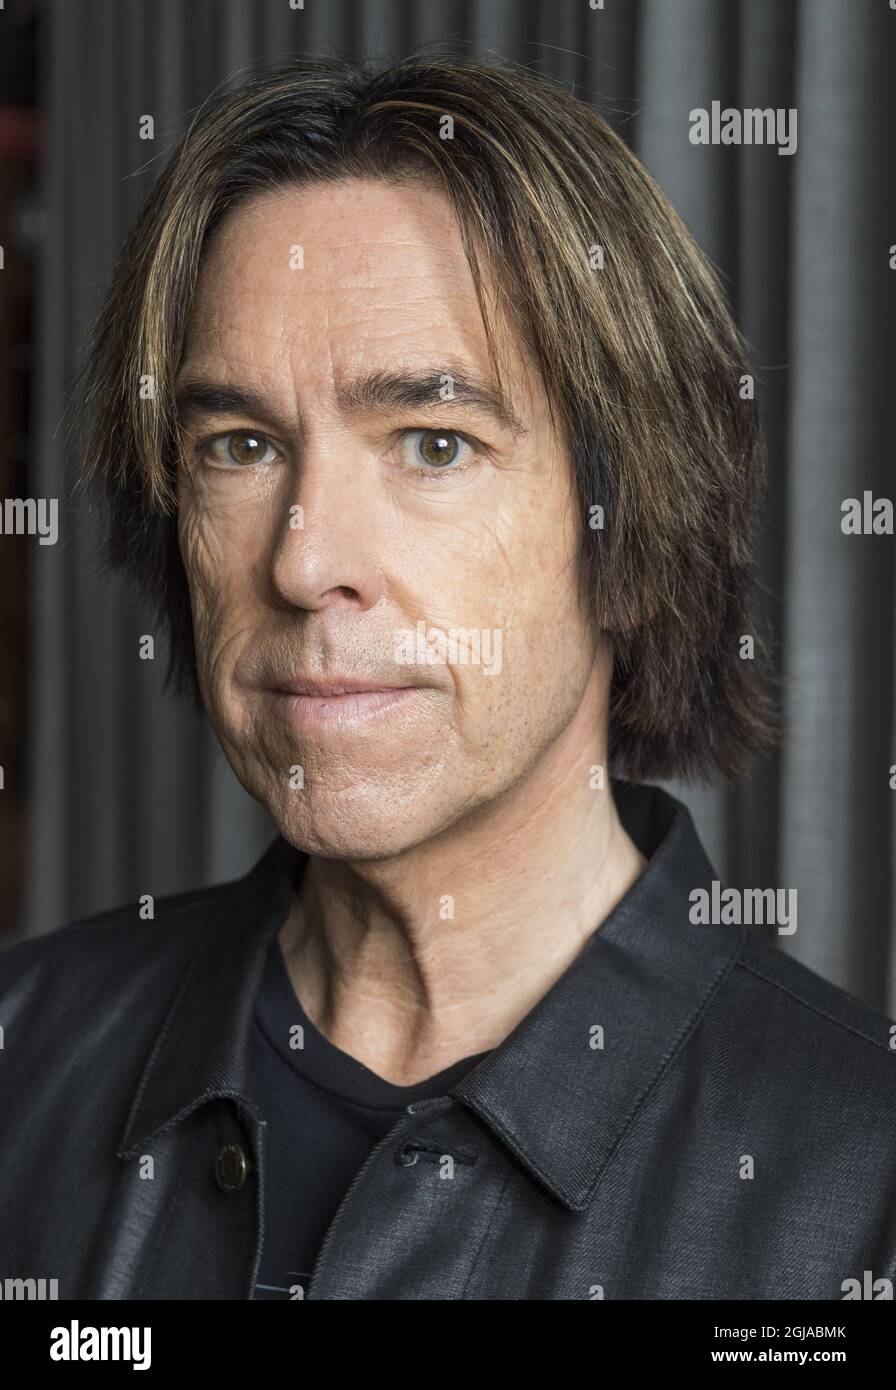 STOCKHOLM 20161121 Per Gessle, former Roxette-member, during a press  meeting in Stockholm,Sweden, November 21, 2016. Gessle is going on a  concert tour without the other half of the Roxette, Marie Fredriksson. Foto: